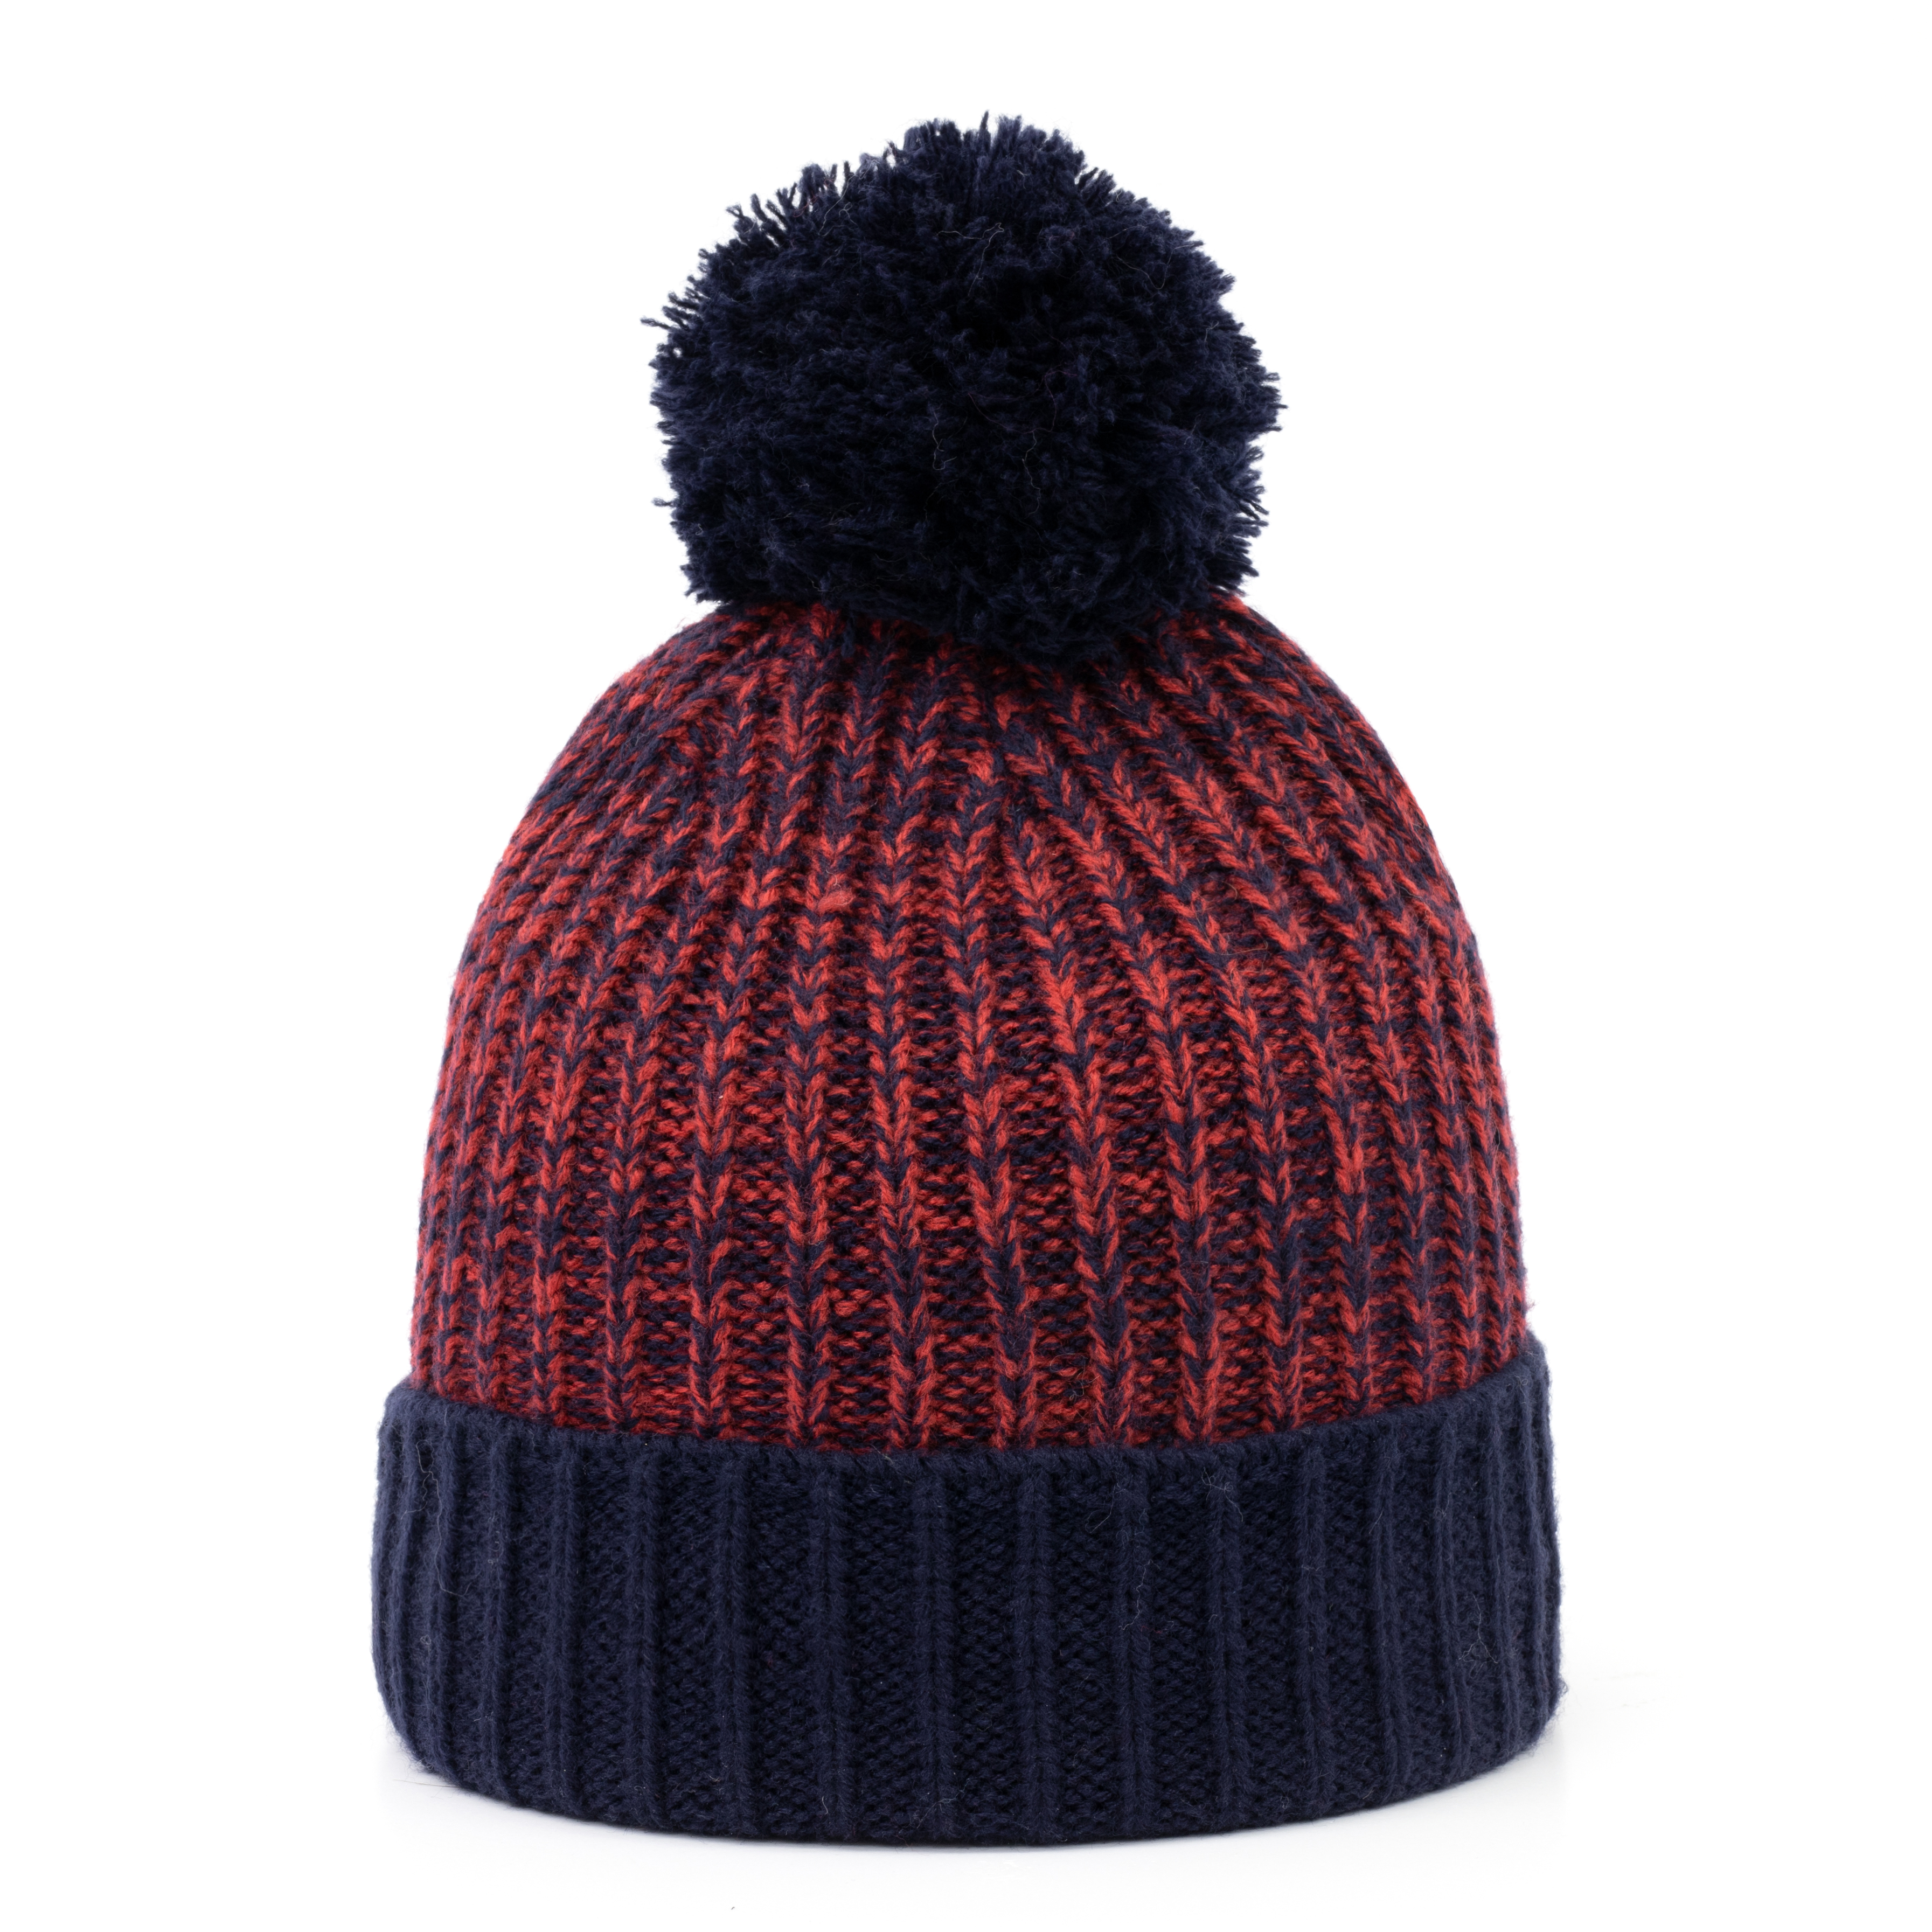 Smith & Miller Iver Beanie, navy/red